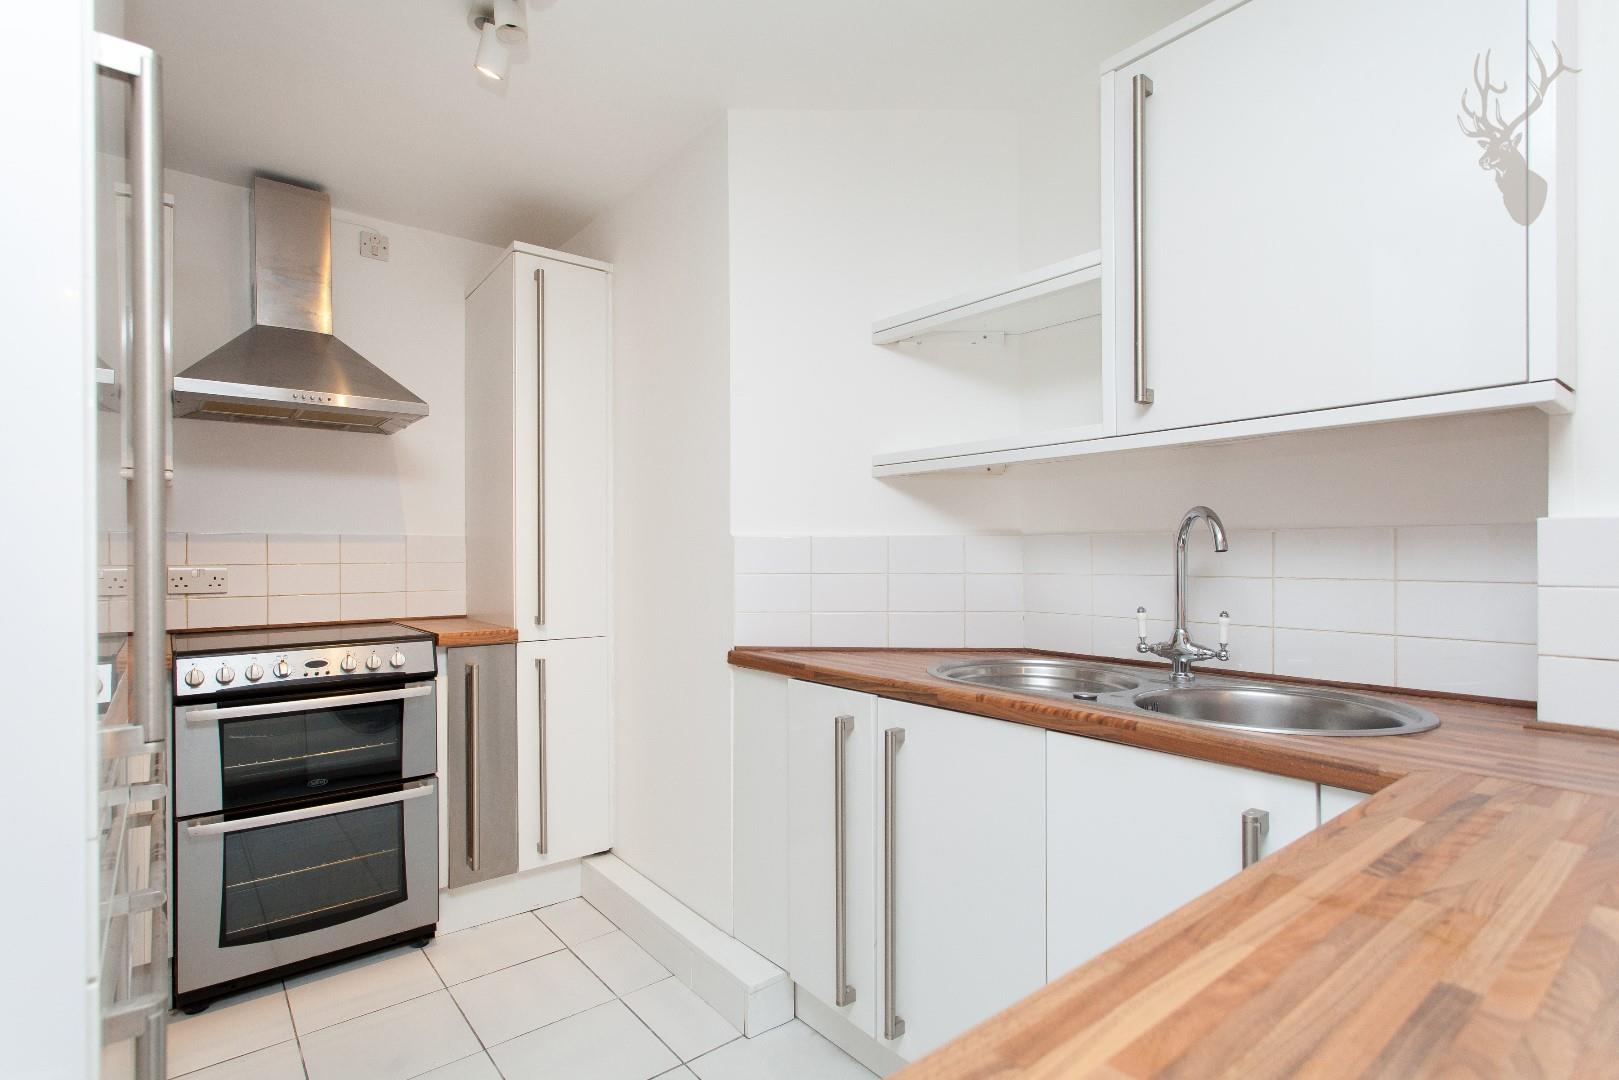 Similar Property: Apartment - First Floor in Bethnal Green